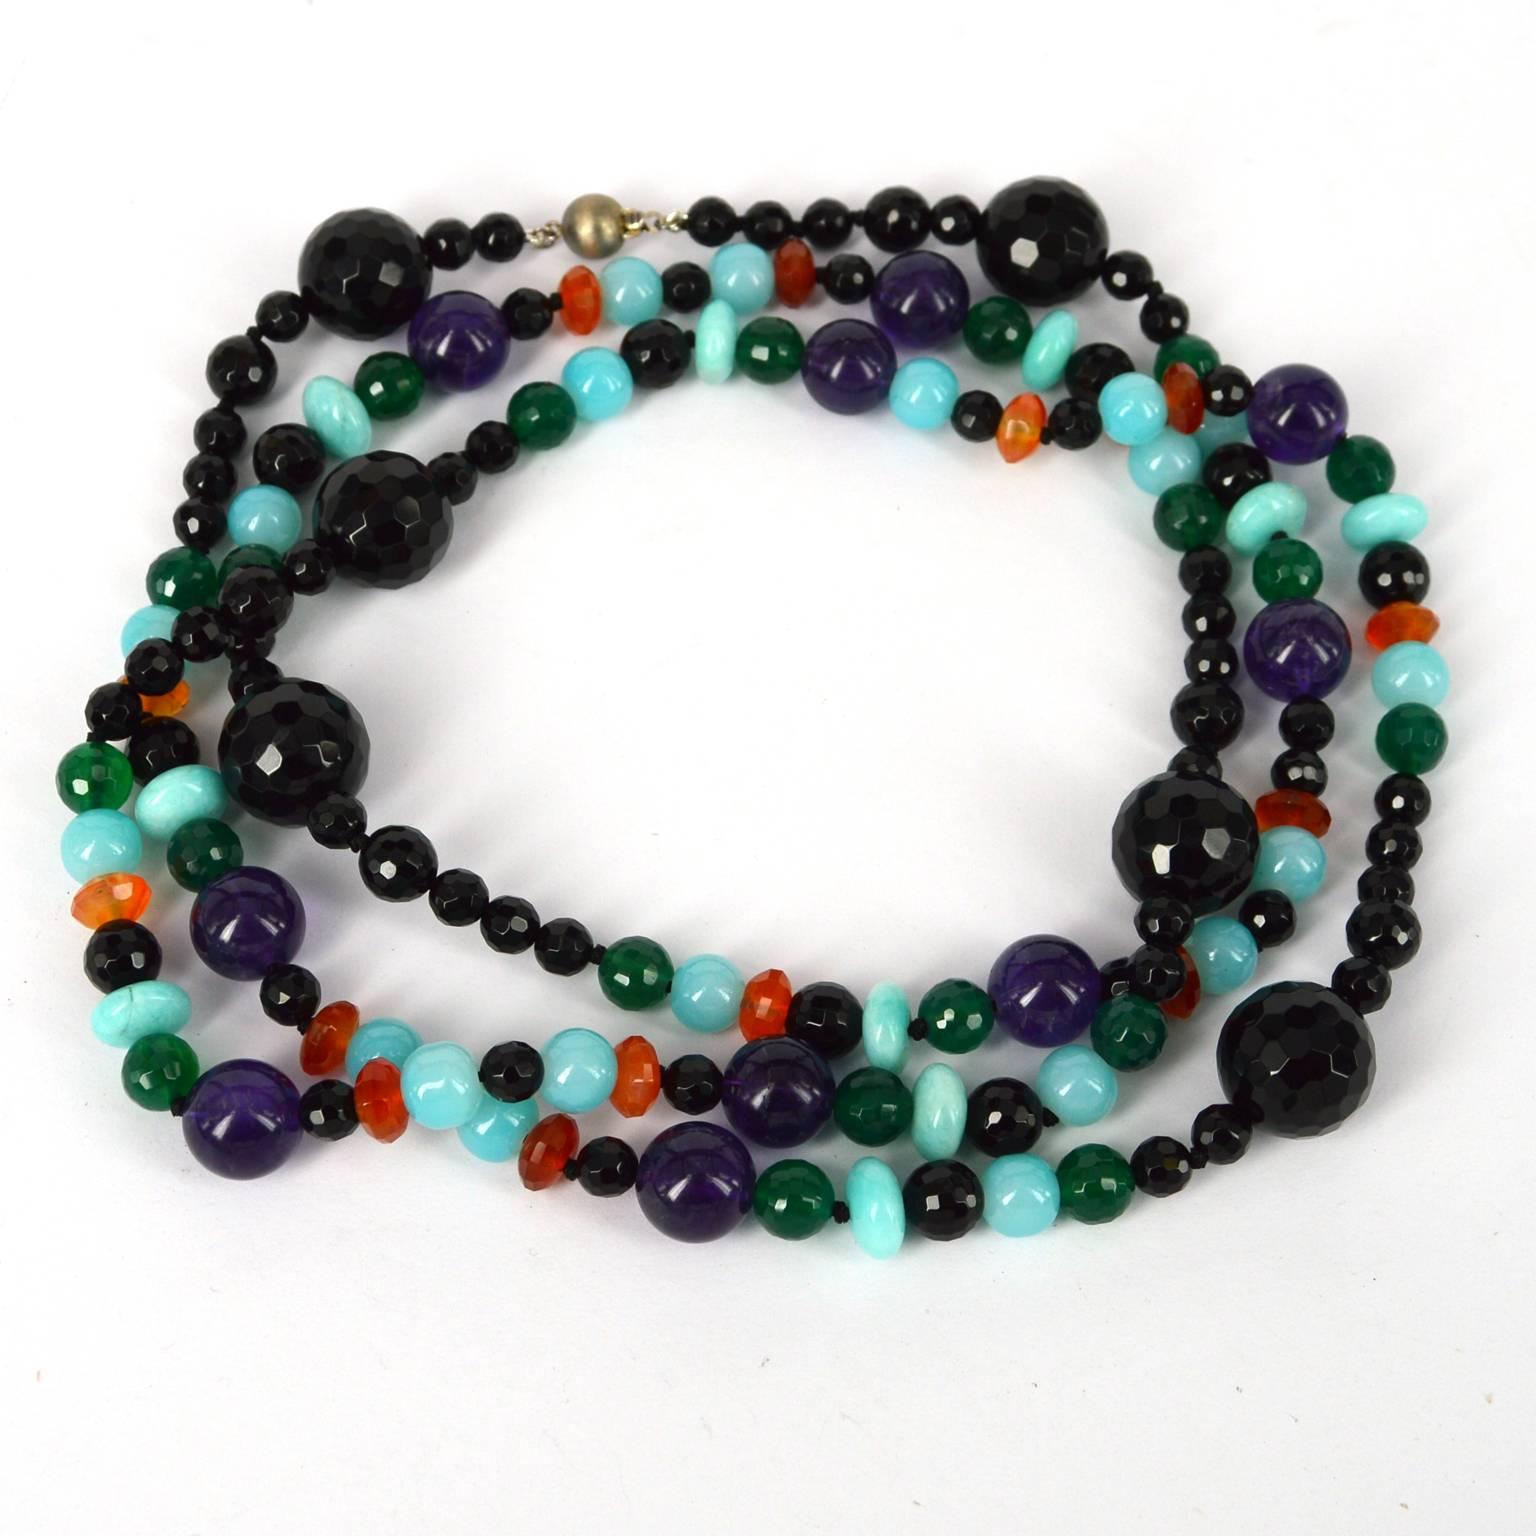 Barcelona long knotted necklace made from 6, 10 and 16mm faceted Onyx, 8mm Faceted Green Onyx, 8x5mm faceted Carnelian, 12mm polished Amethyst, 10x5mm Polished Peruvian Amazonite and 8mm aqua glass beads with a 8mm brushed Sterling silver